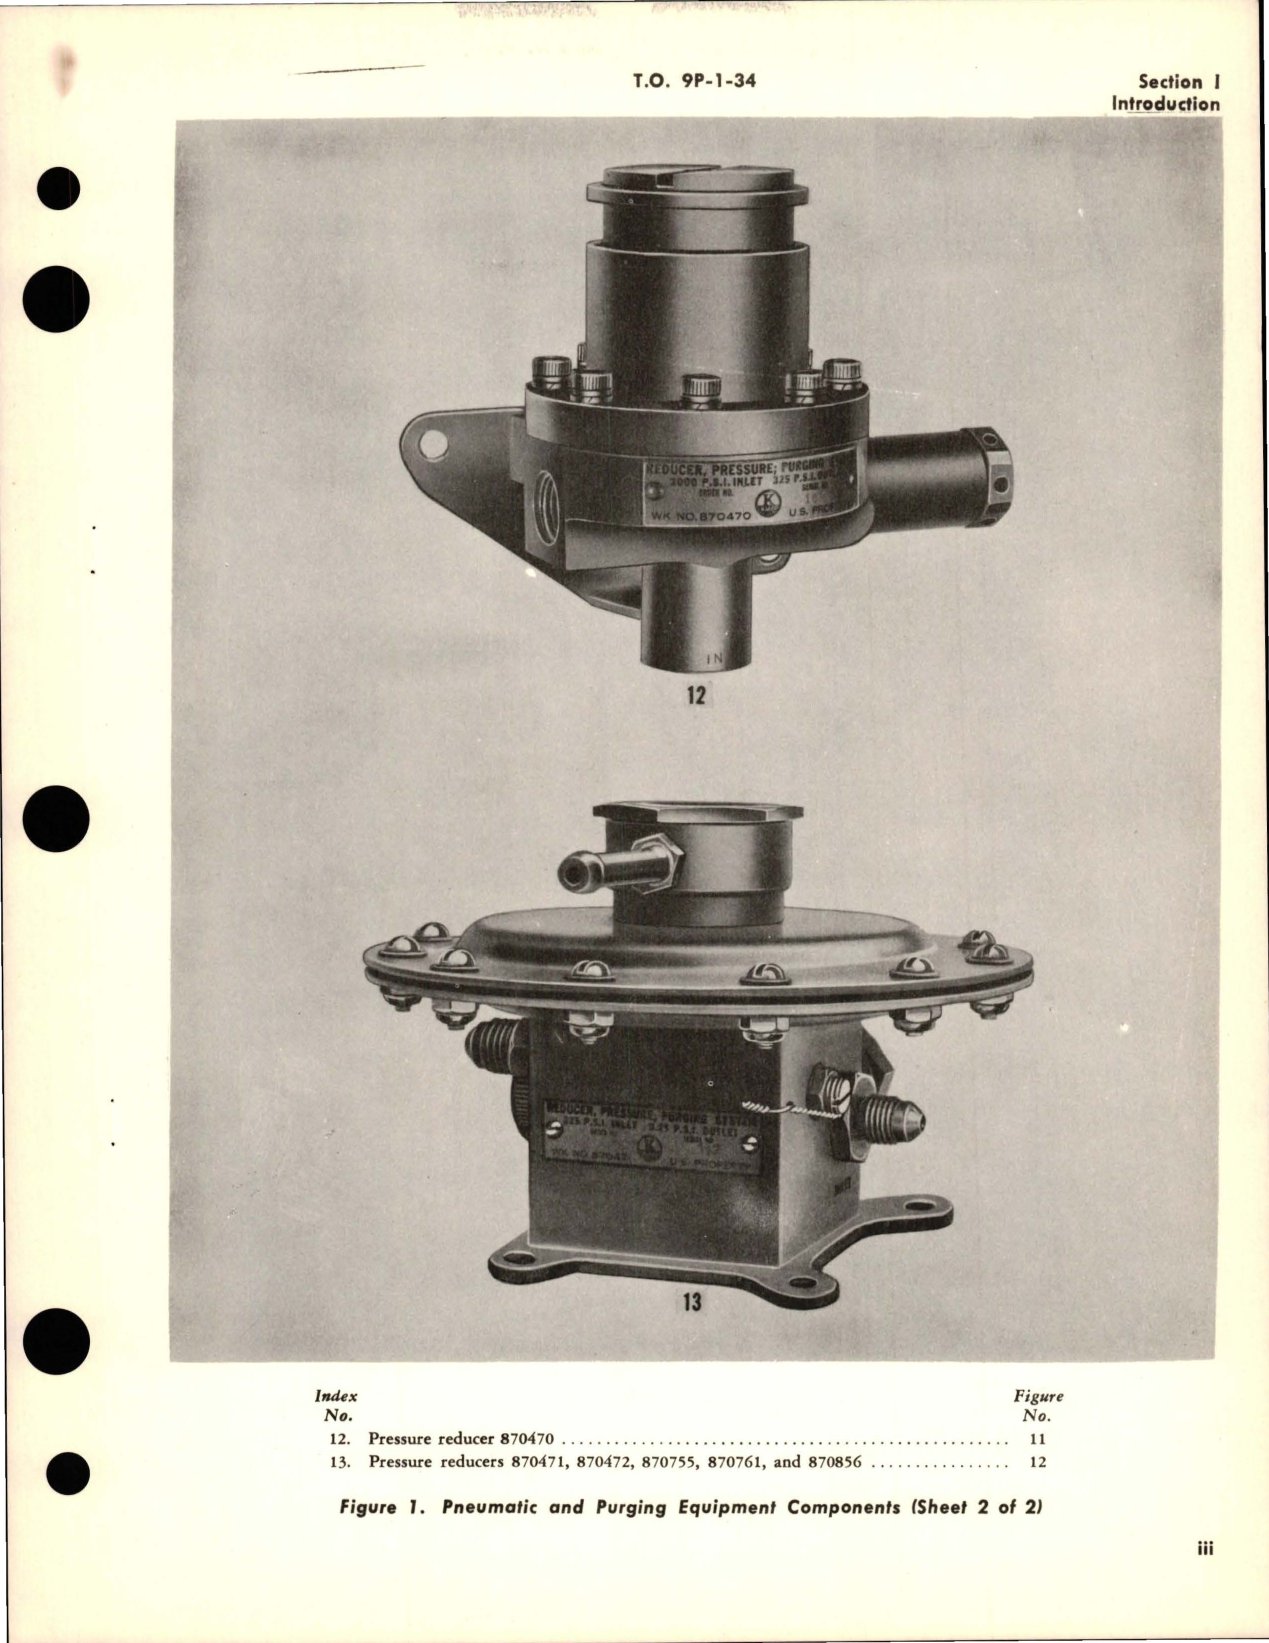 Sample page 5 from AirCorps Library document: Illustrated Parts Breakdown for Pneumatic and Purging Equipment 